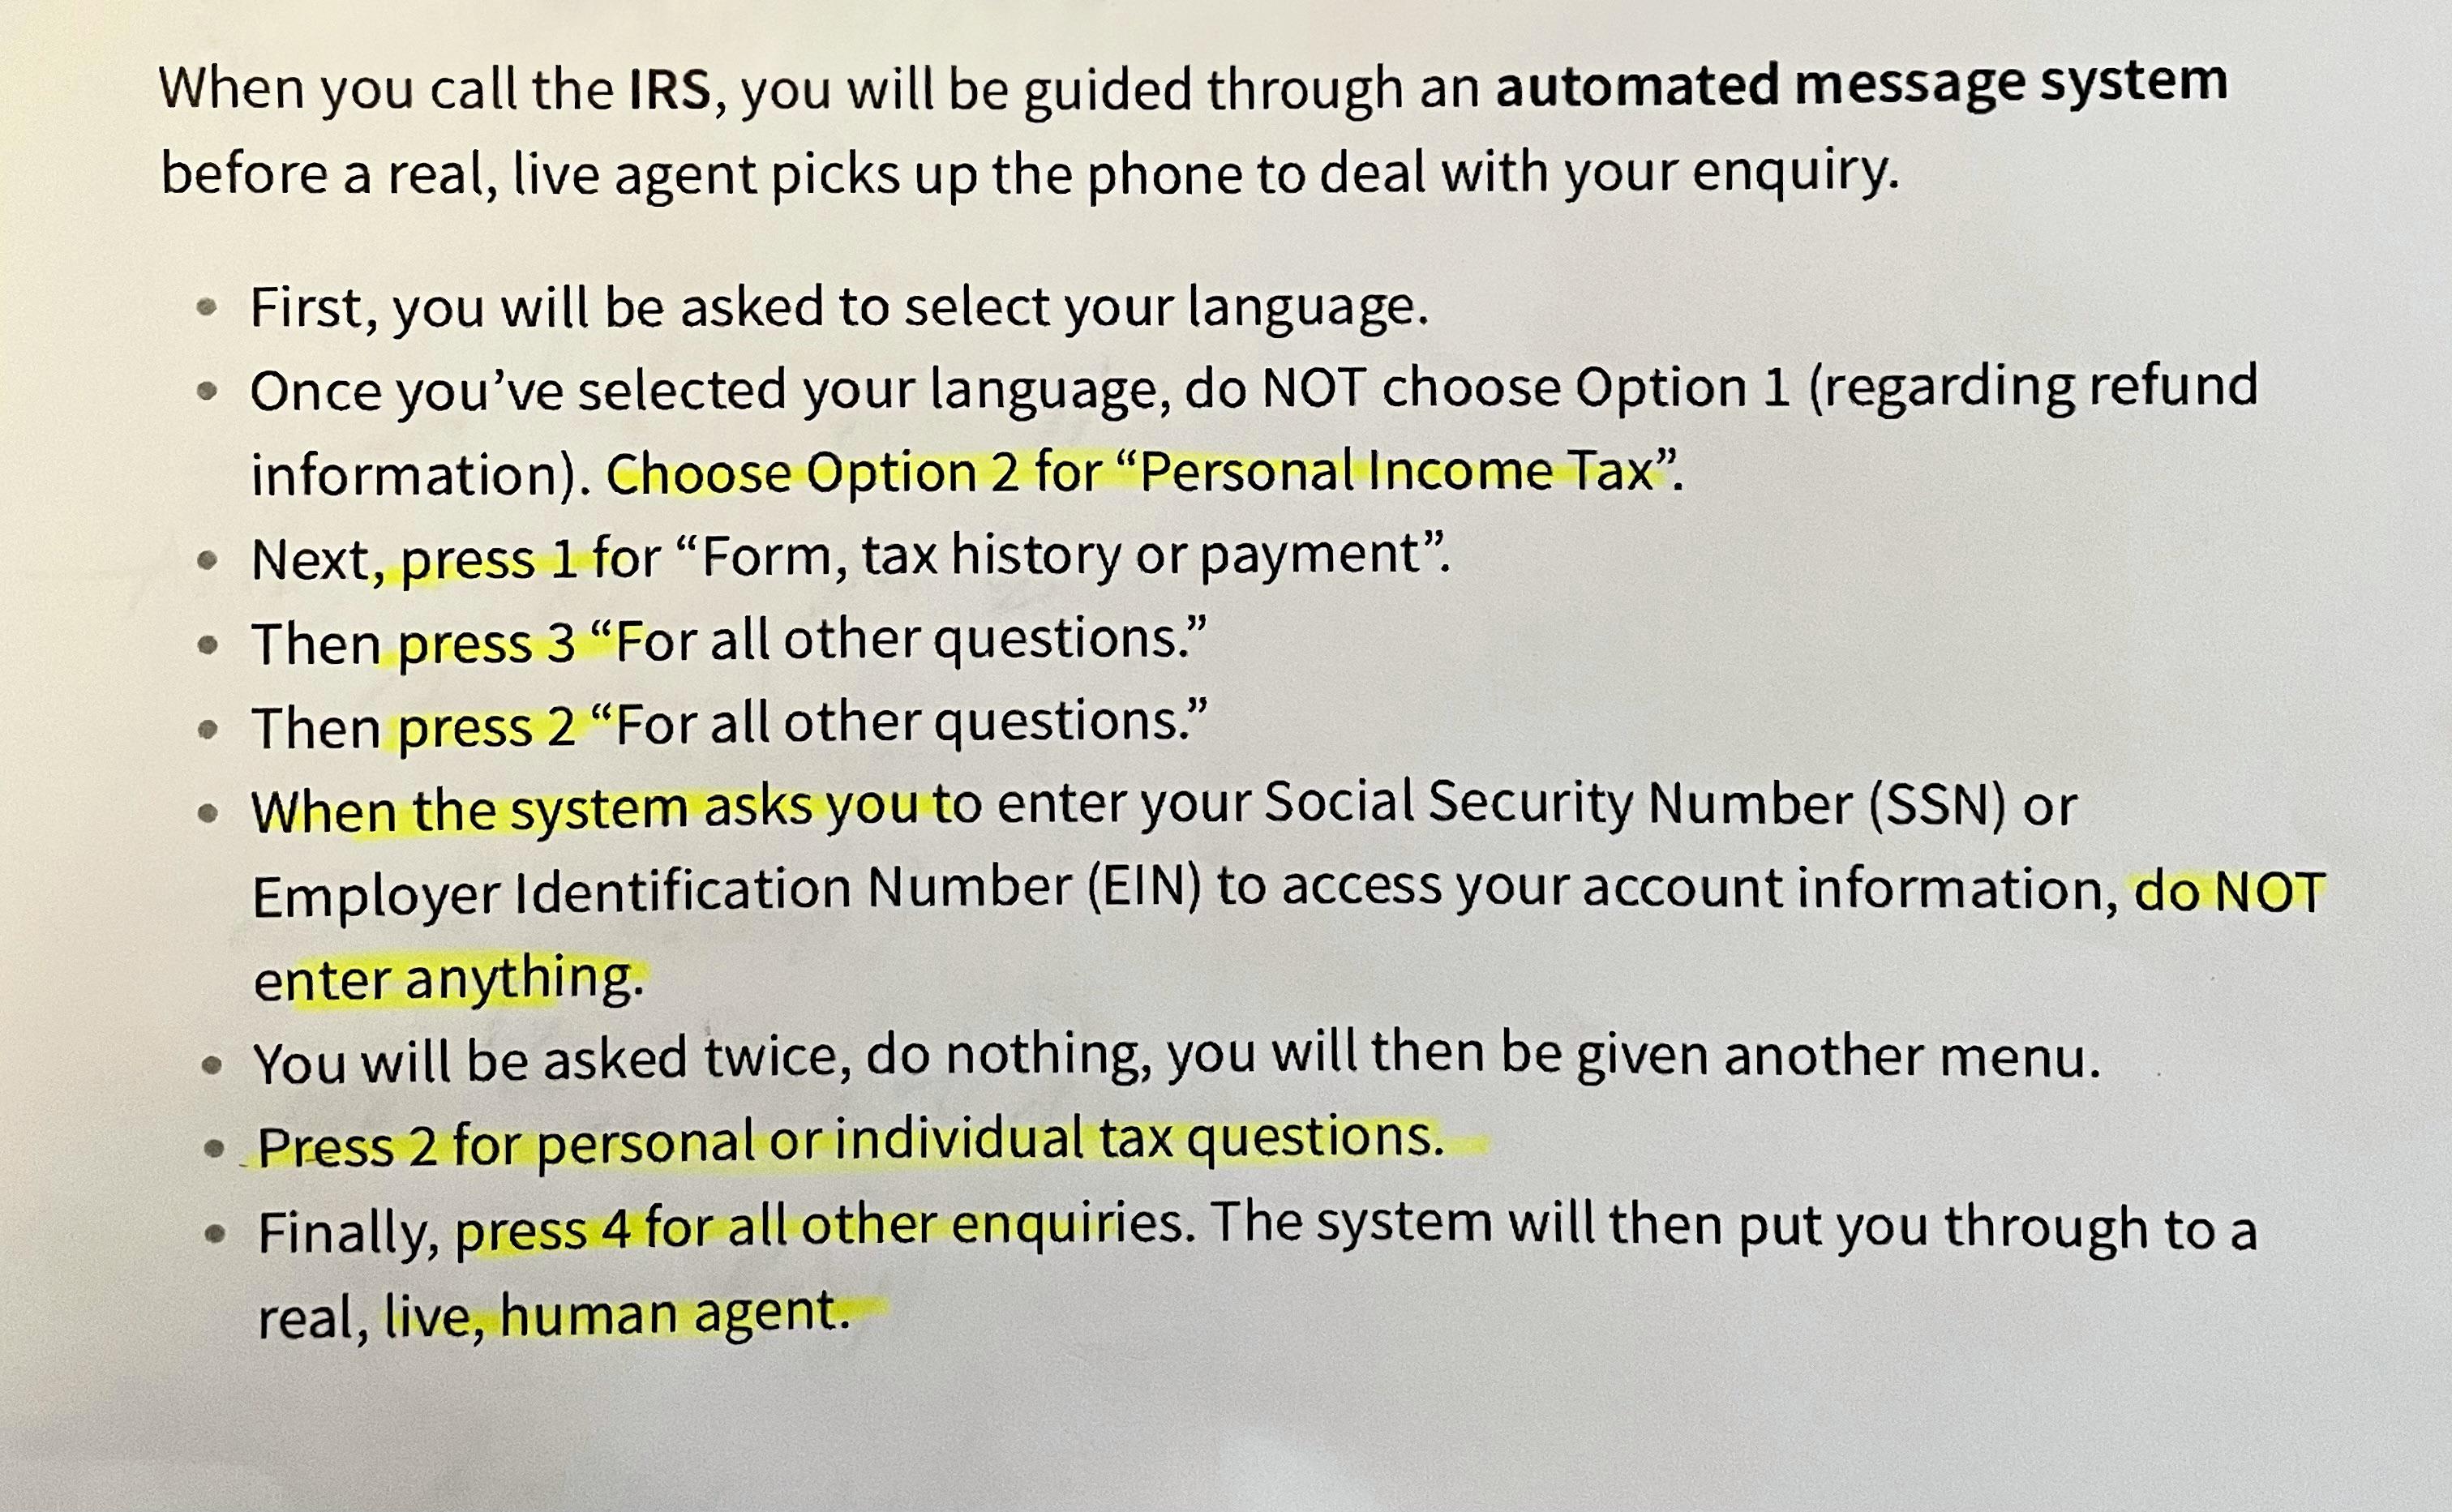 talk to a human - When you call the Irs, you will be guided through an automated message system before a real, live agent picks up the phone to deal with your enquiry. First, you will be asked to select your language. Once you've selected your language, d